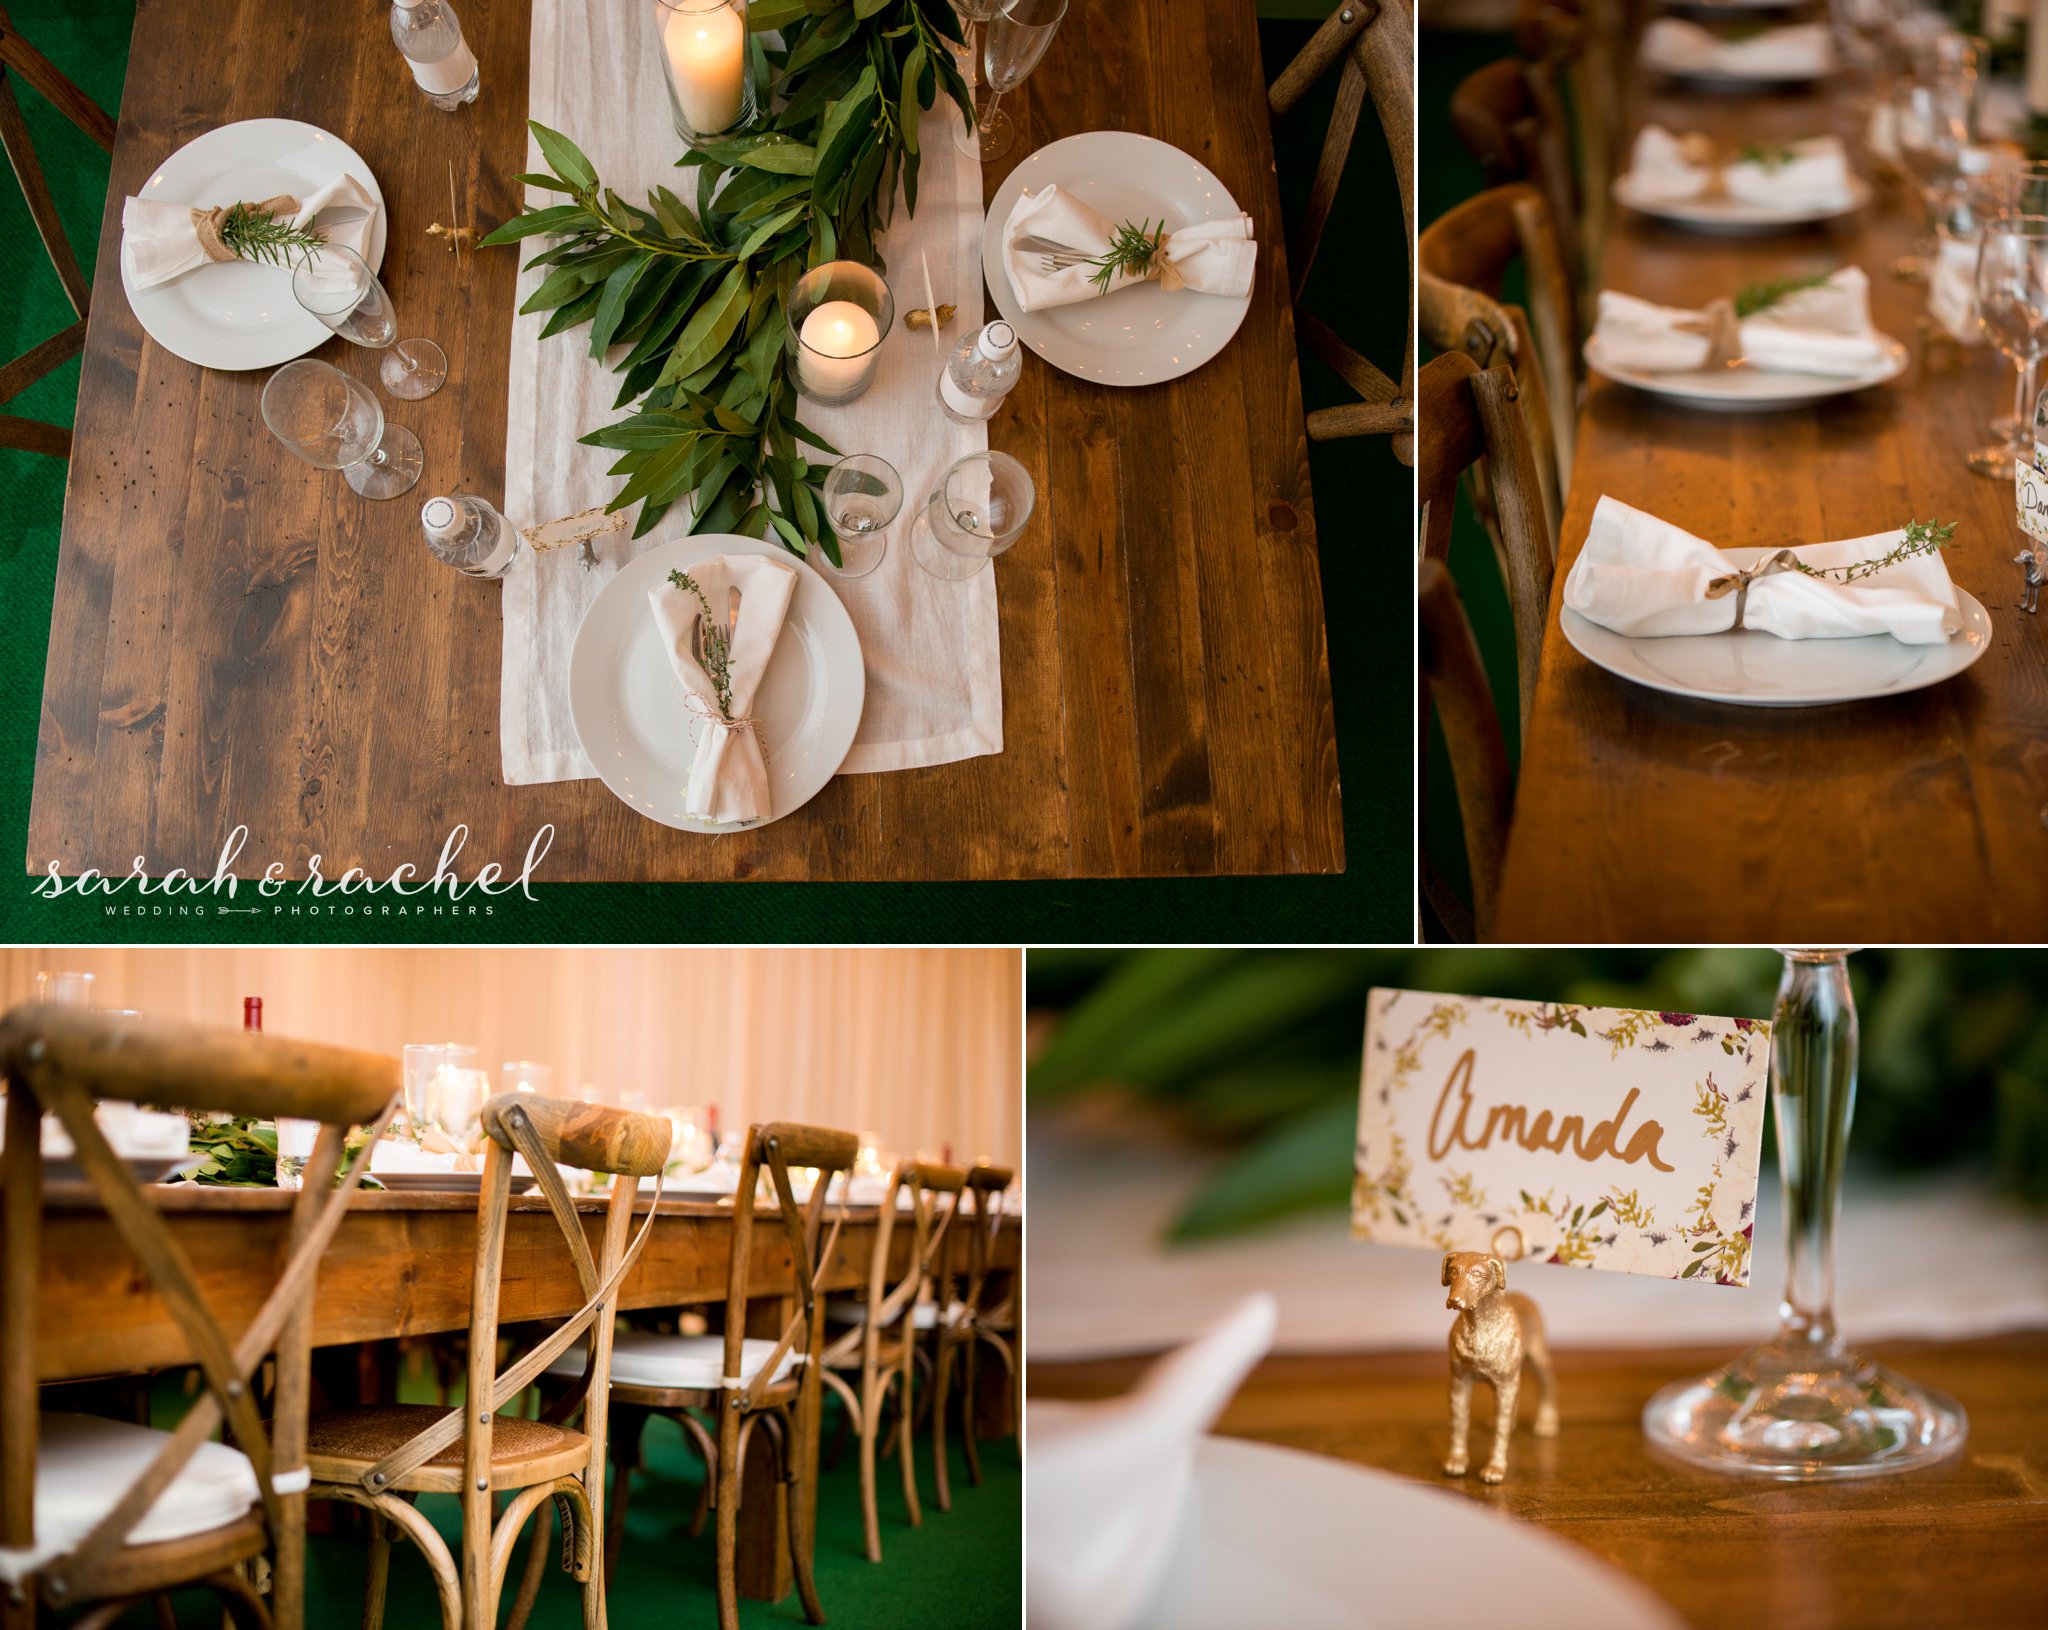 gorgeous barn wood tables wedding reception greenery and dog statue name cards